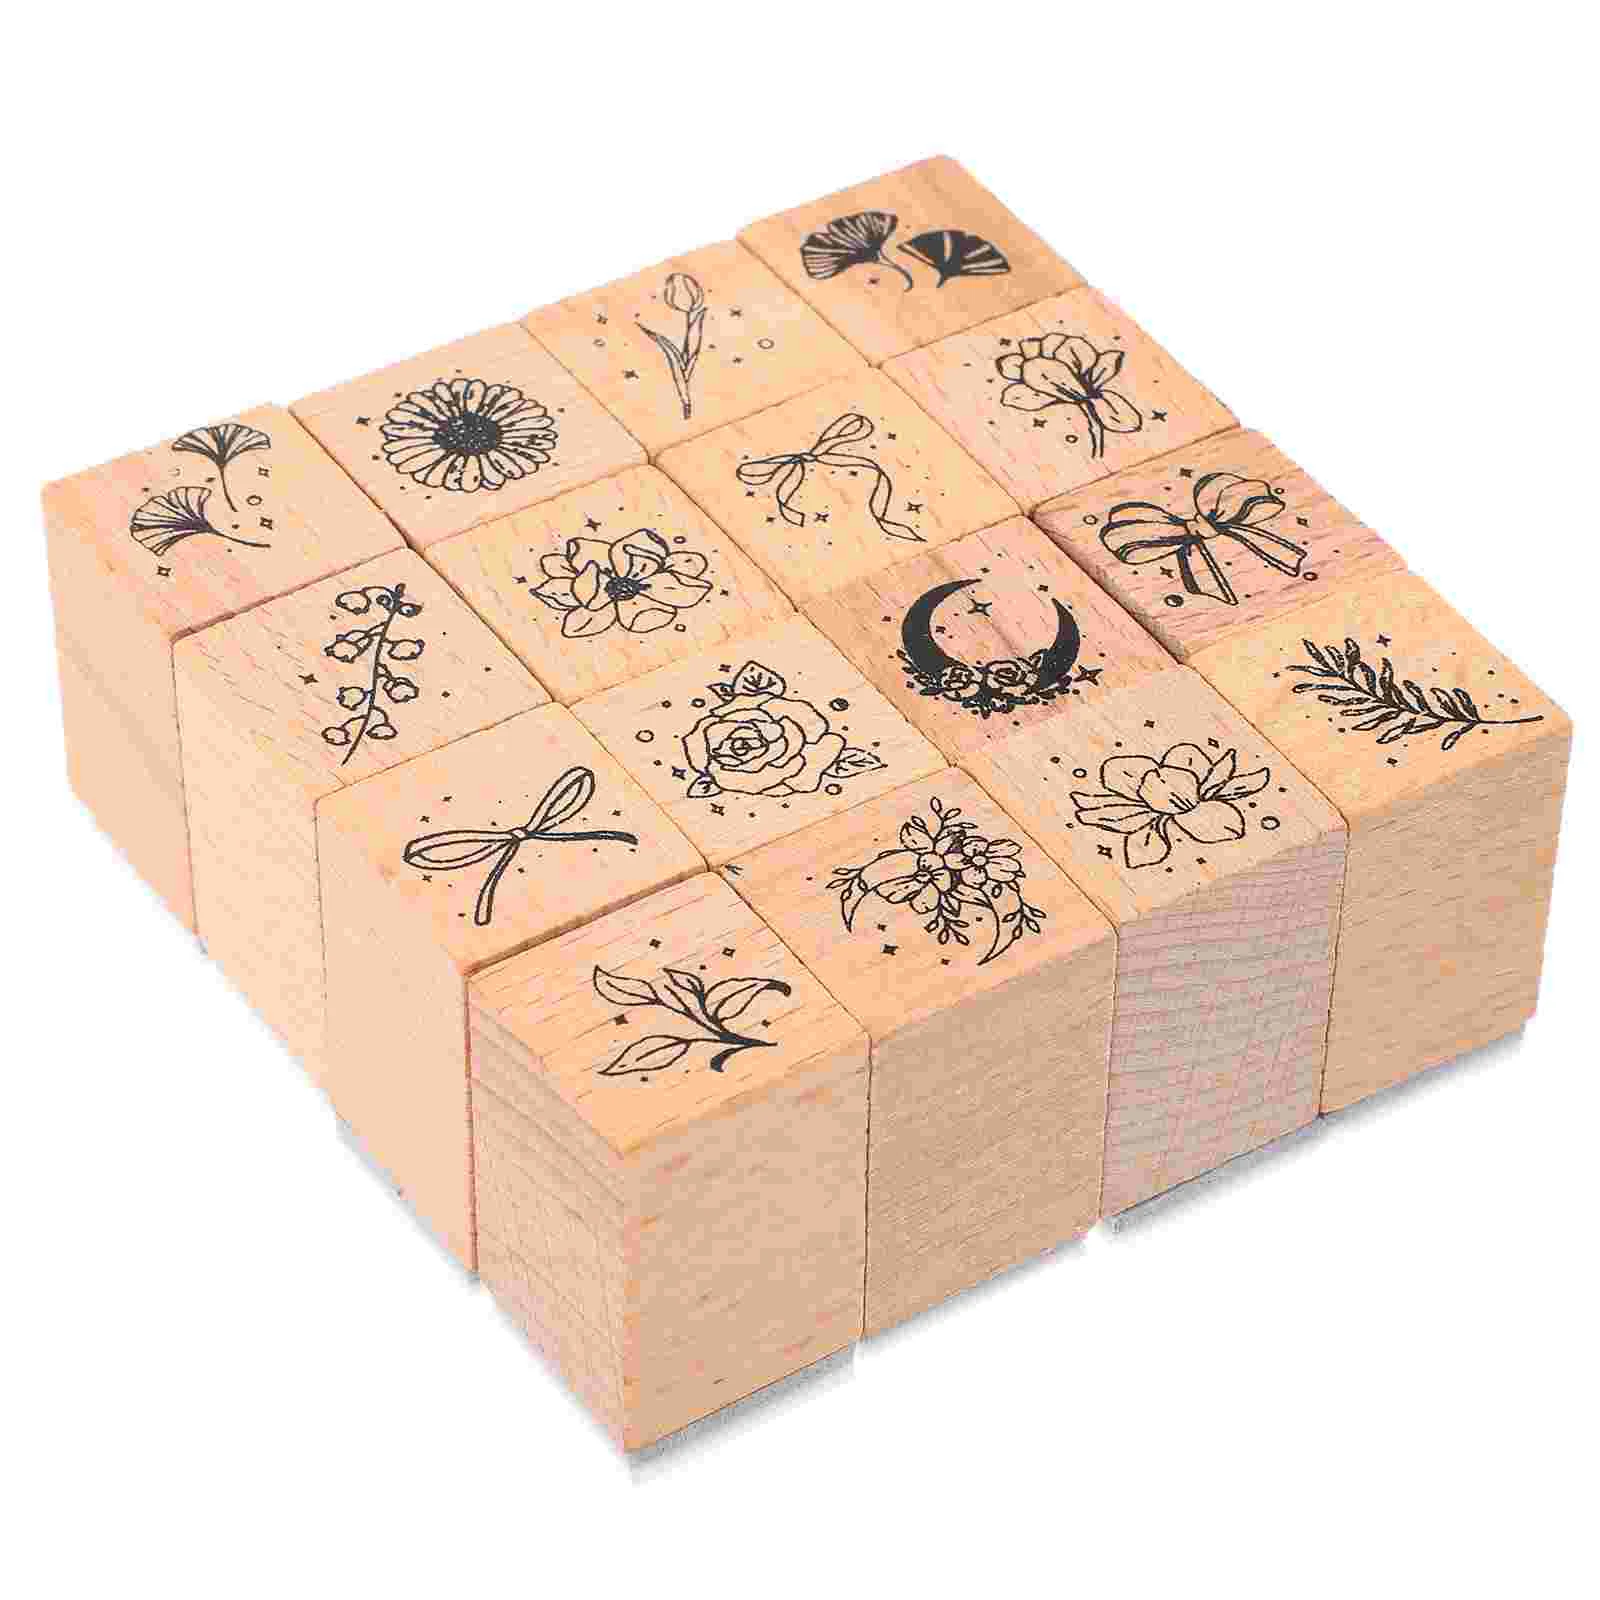 

16 Pcs Giftt Cards DIY Diary Stamp Hand Account Gifts Wooden Scrapbook Stamps Crafting Journal Gift+card